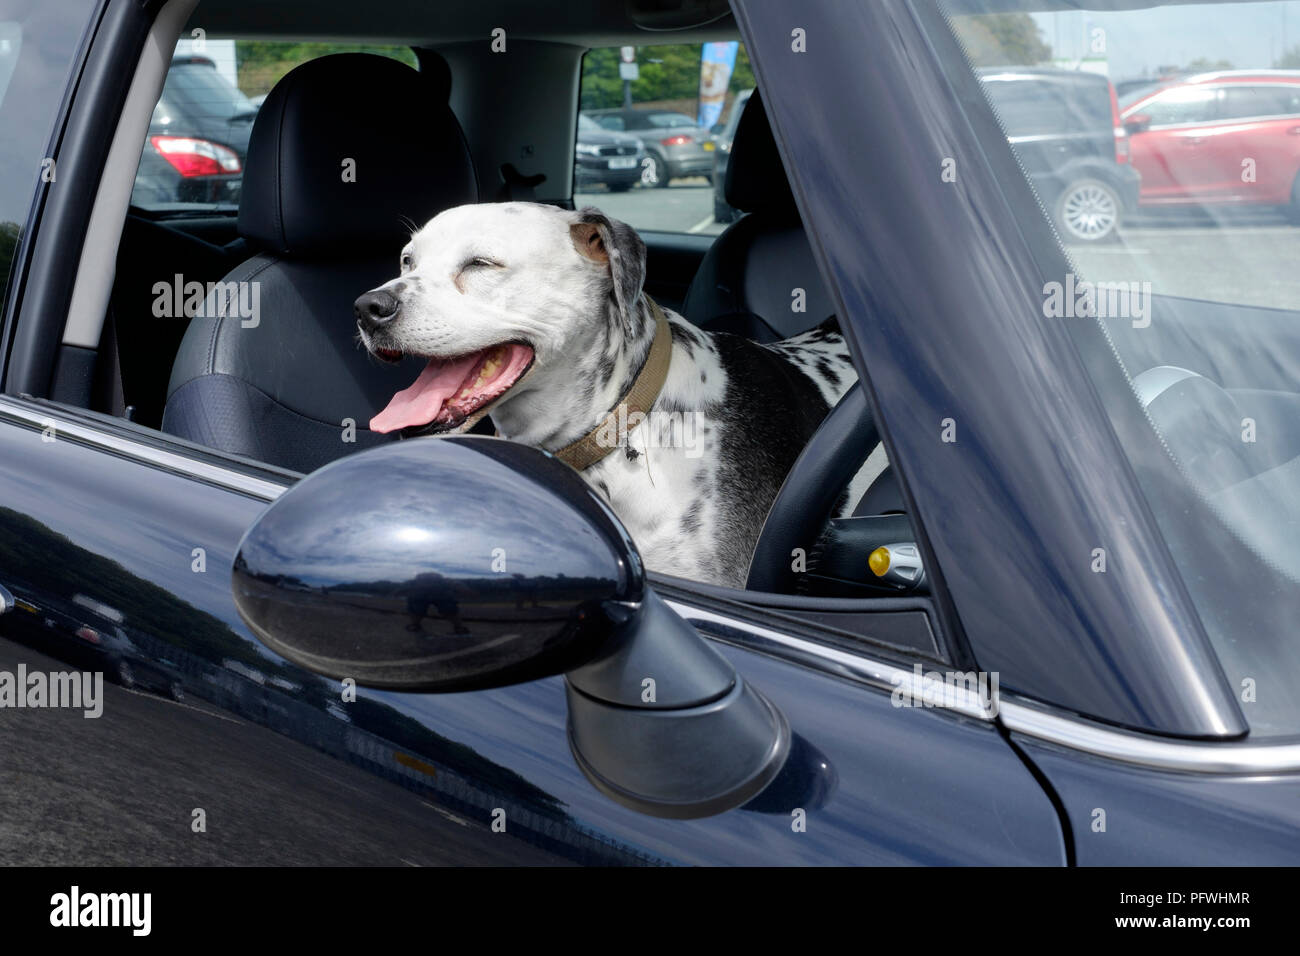 dalmation dog sitting in the front seat of a black mini car england uk Stock Photo